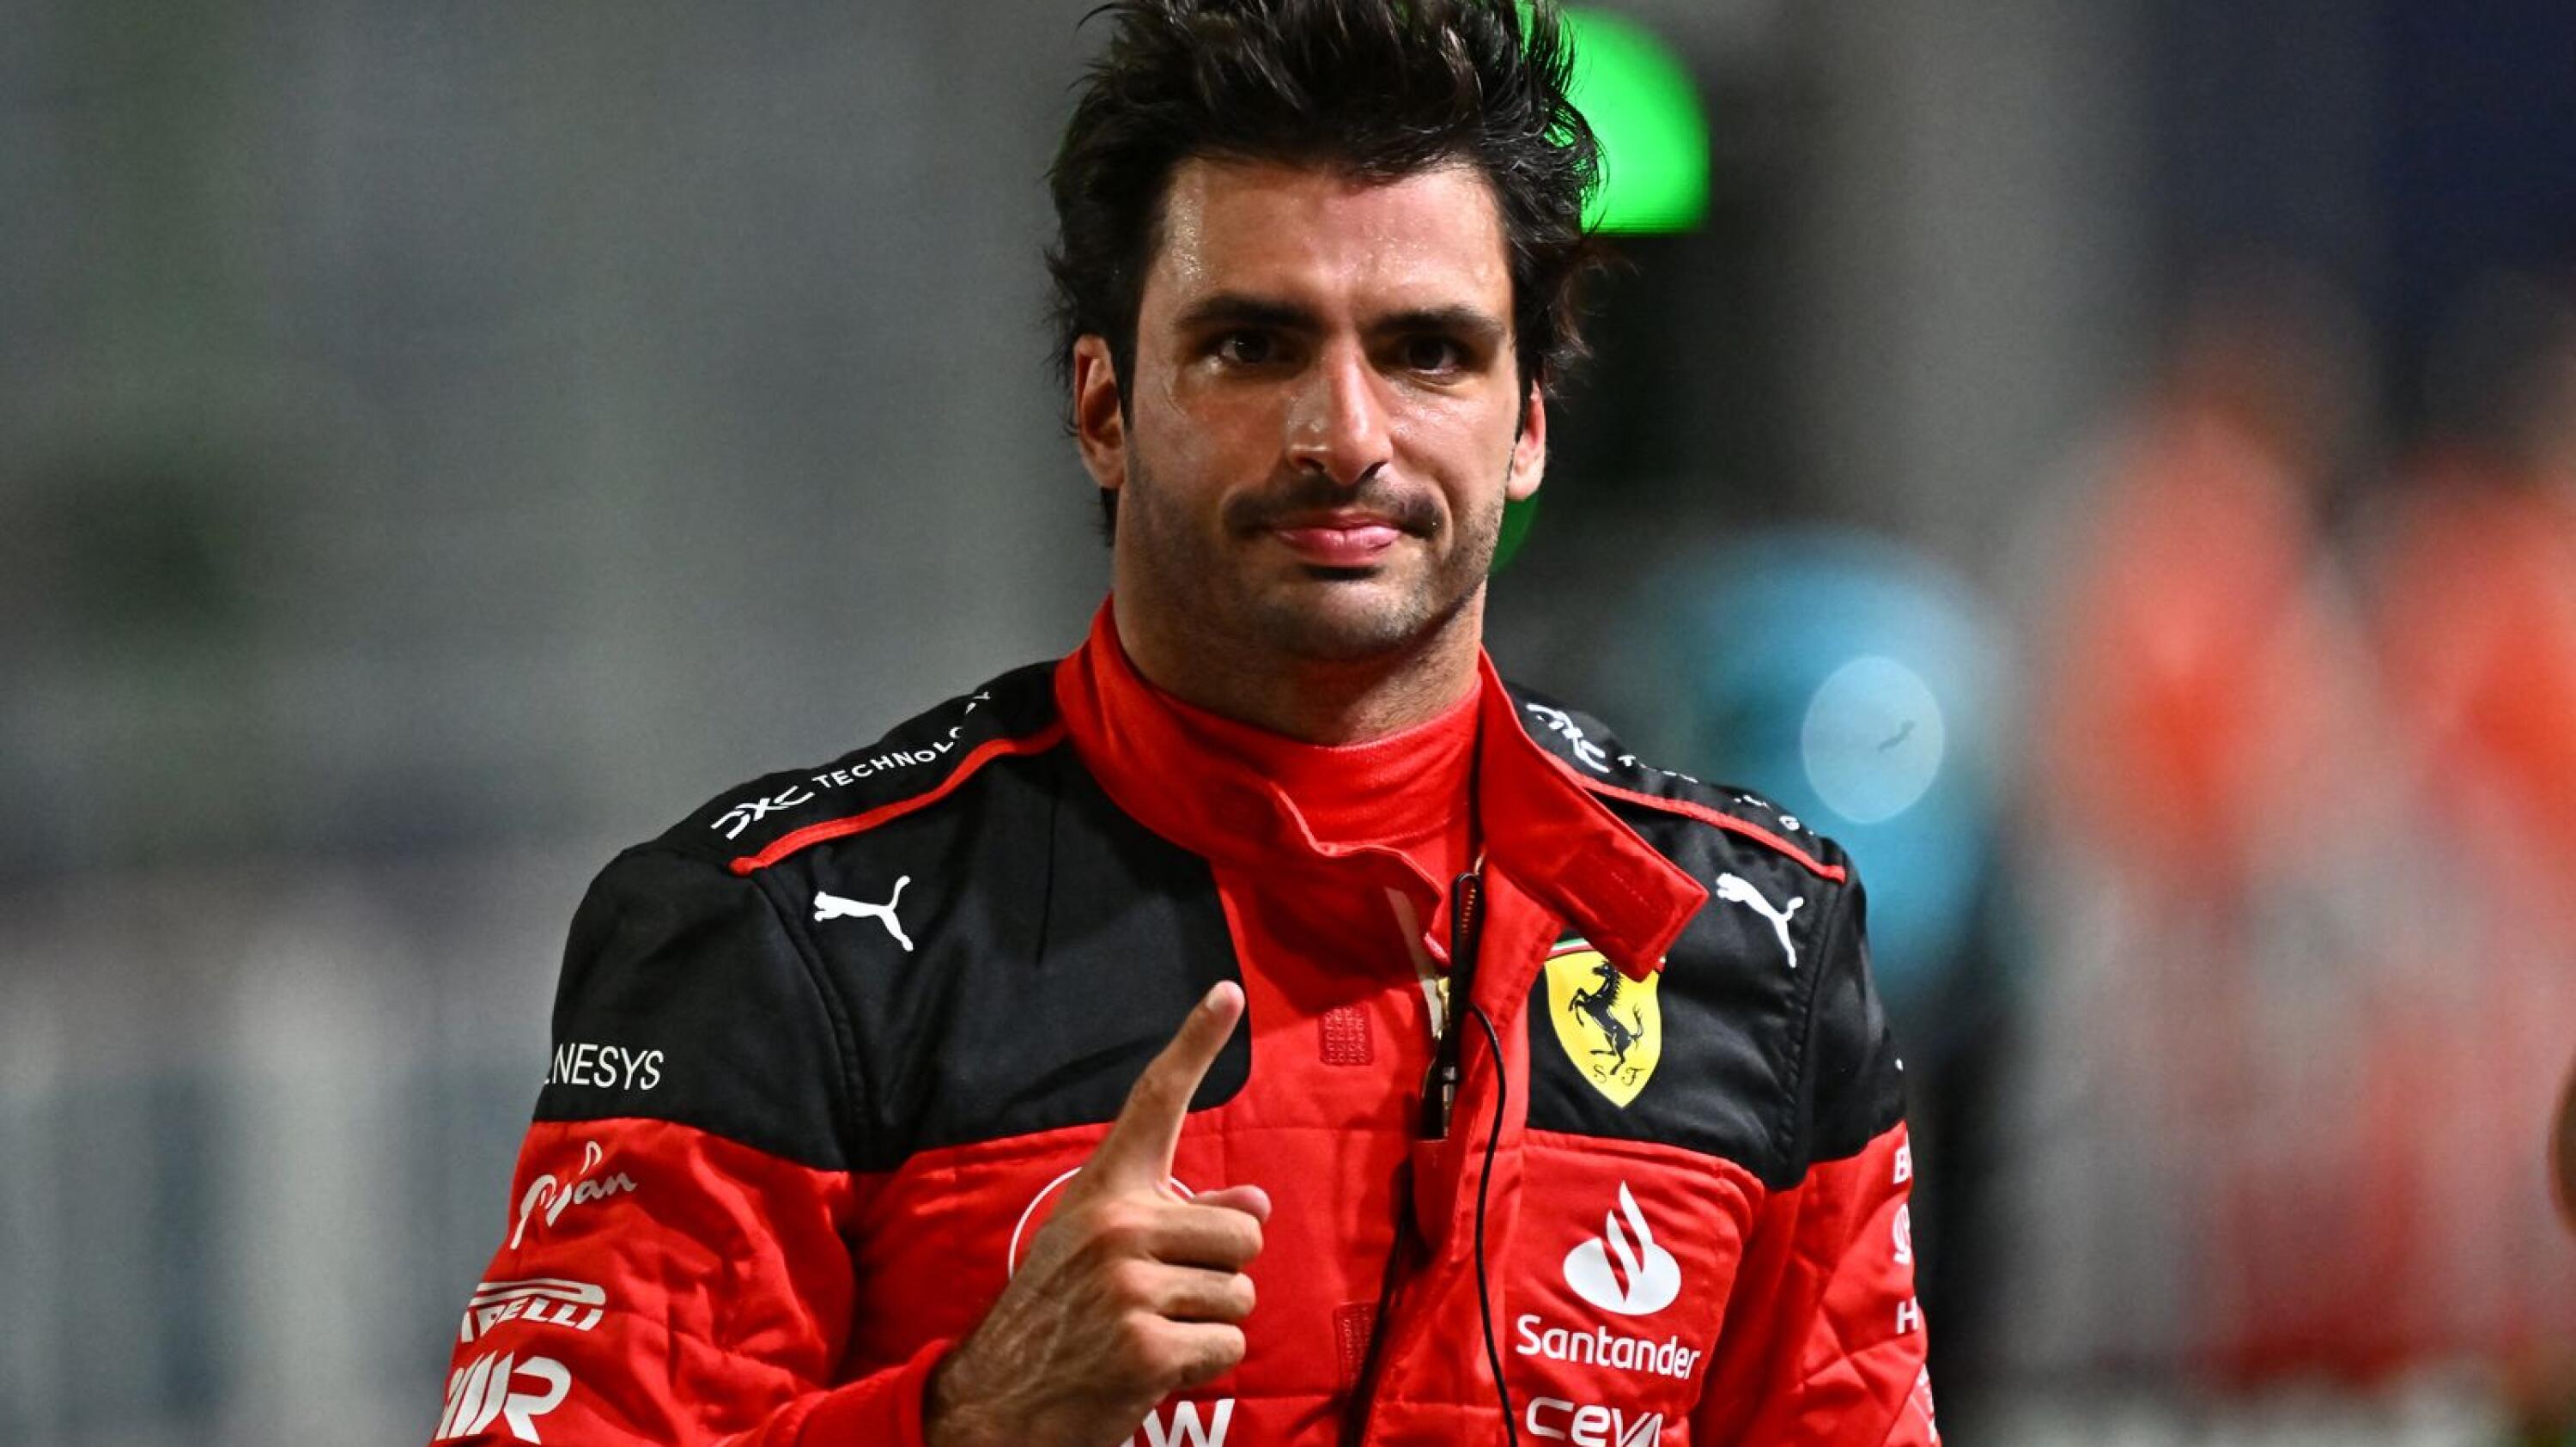 Ferrari's Spanish driver Carlos Sainz Jr gestures after the qualifying session of the Singapore Formula One Grand Prix